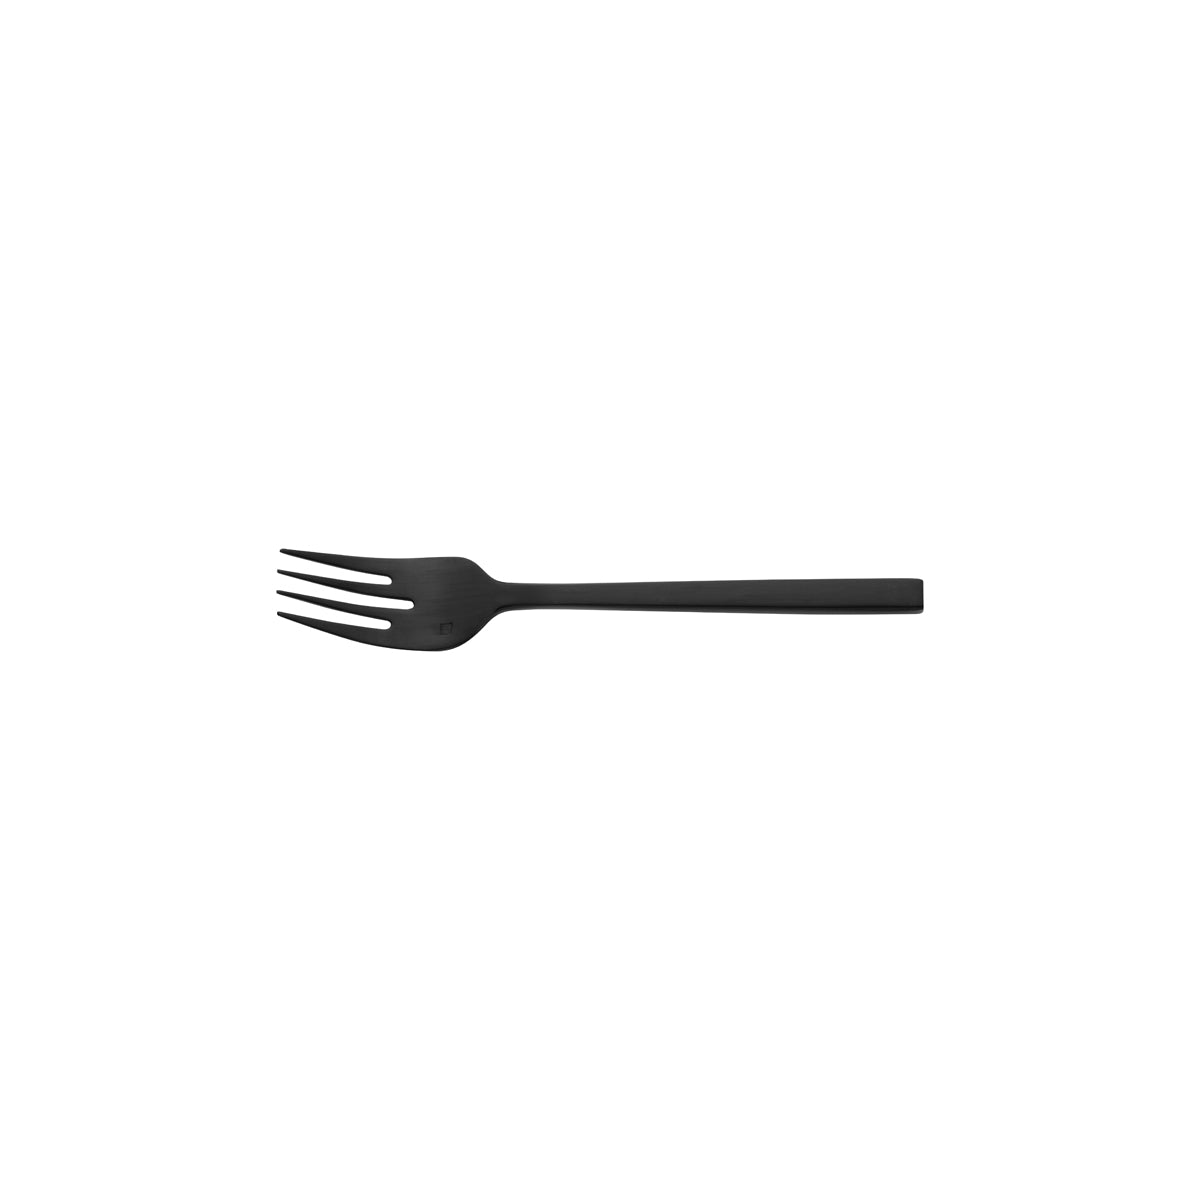 Cake Fork - Arezzo, Black from Fortessa. made out of Stainless Steel and sold in boxes of 12. Hospitality quality at wholesale price with The Flying Fork! 